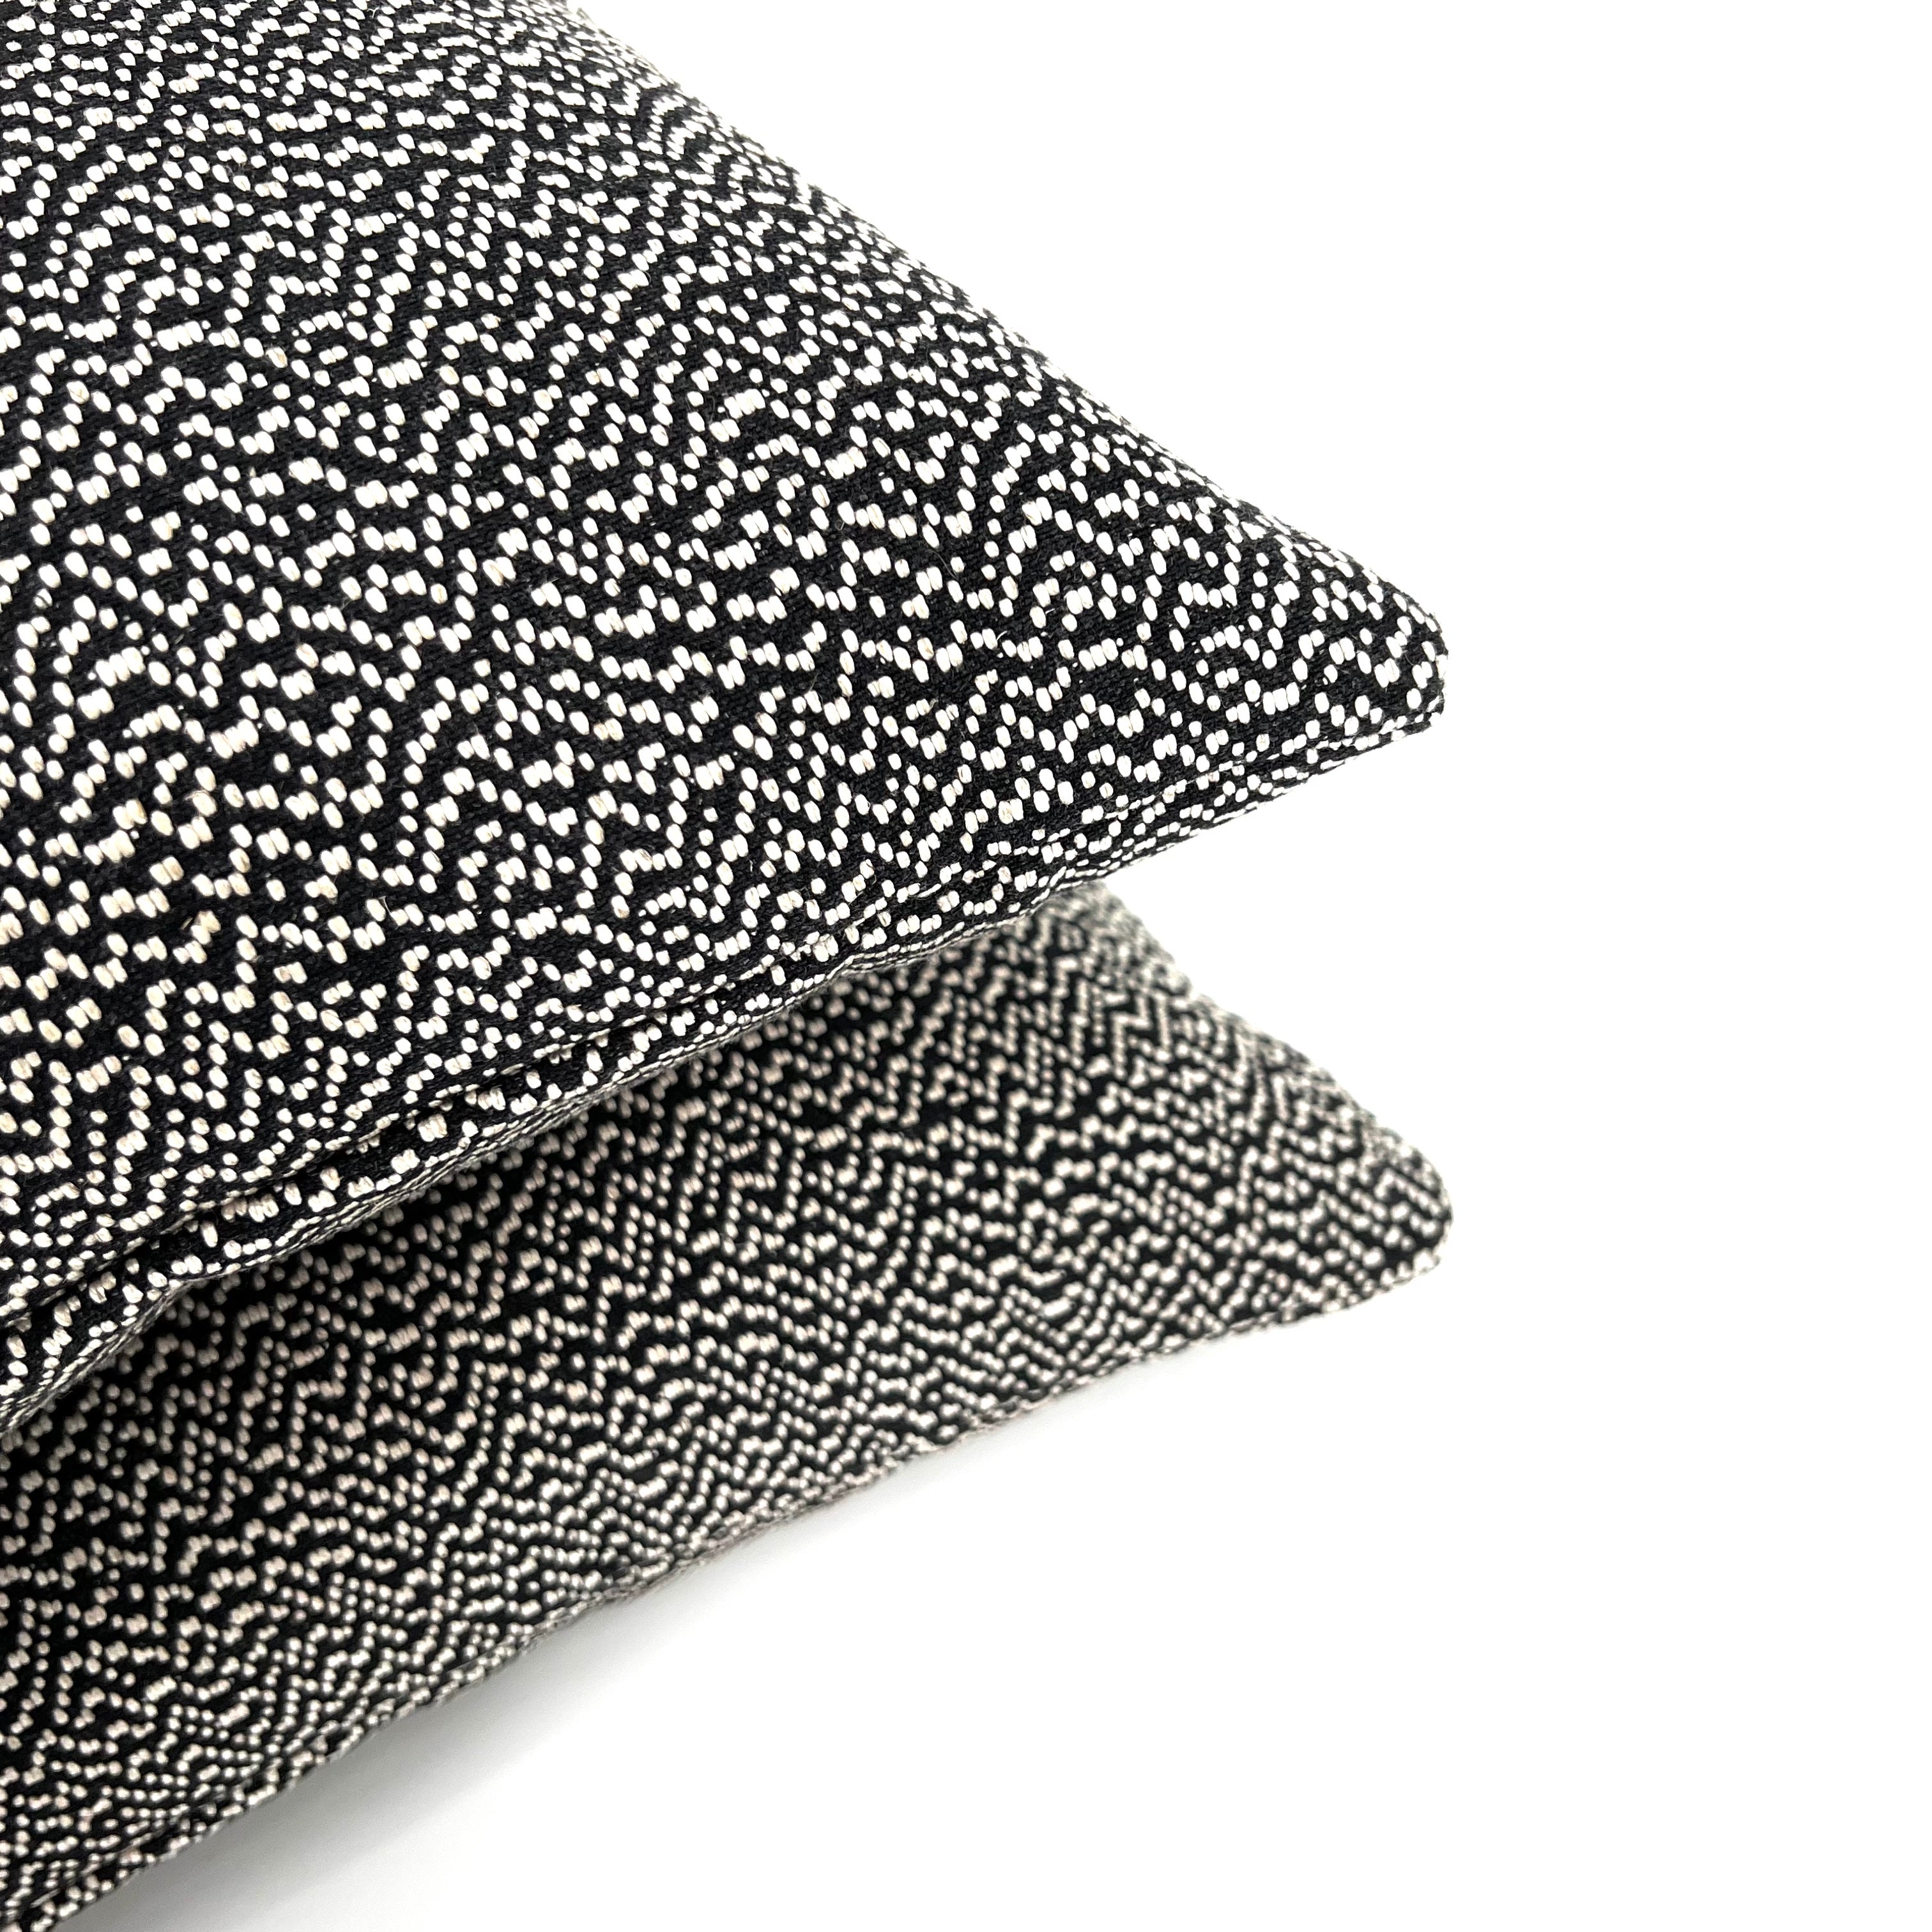 Static Square Pillow